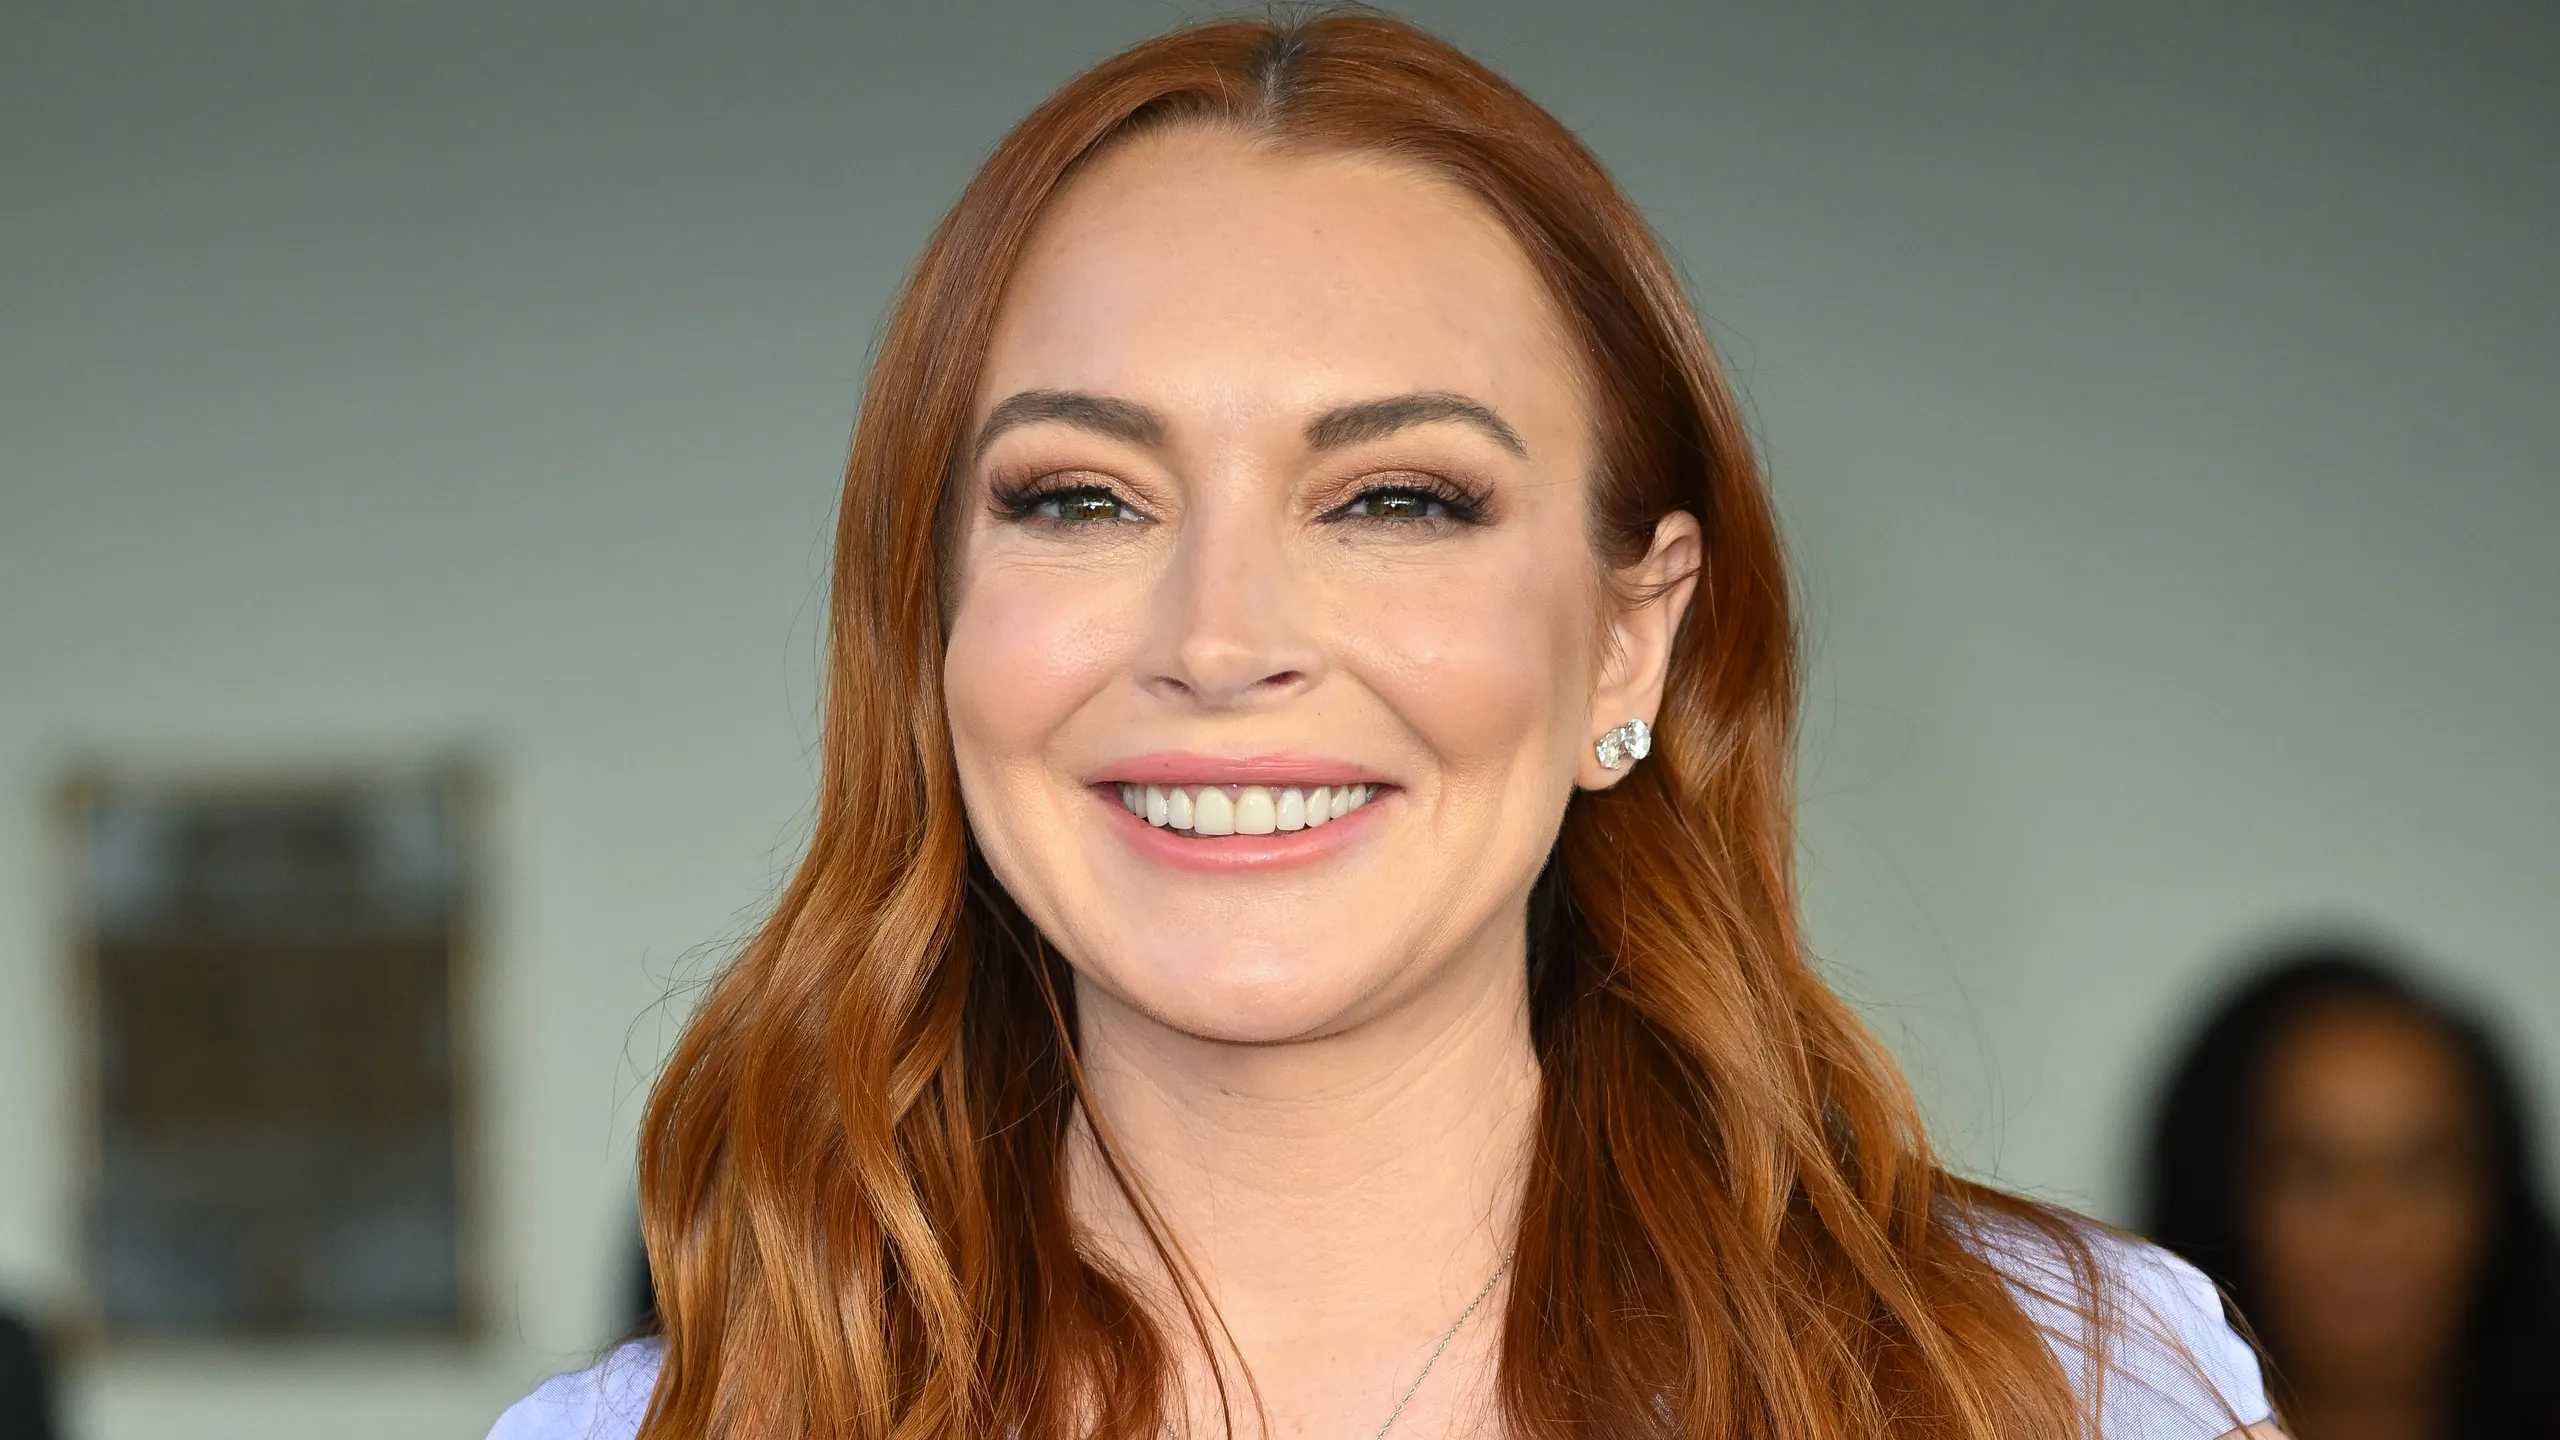 Lindsay Lohan's unexpected appearance in the Mean Girls musical, now streaming